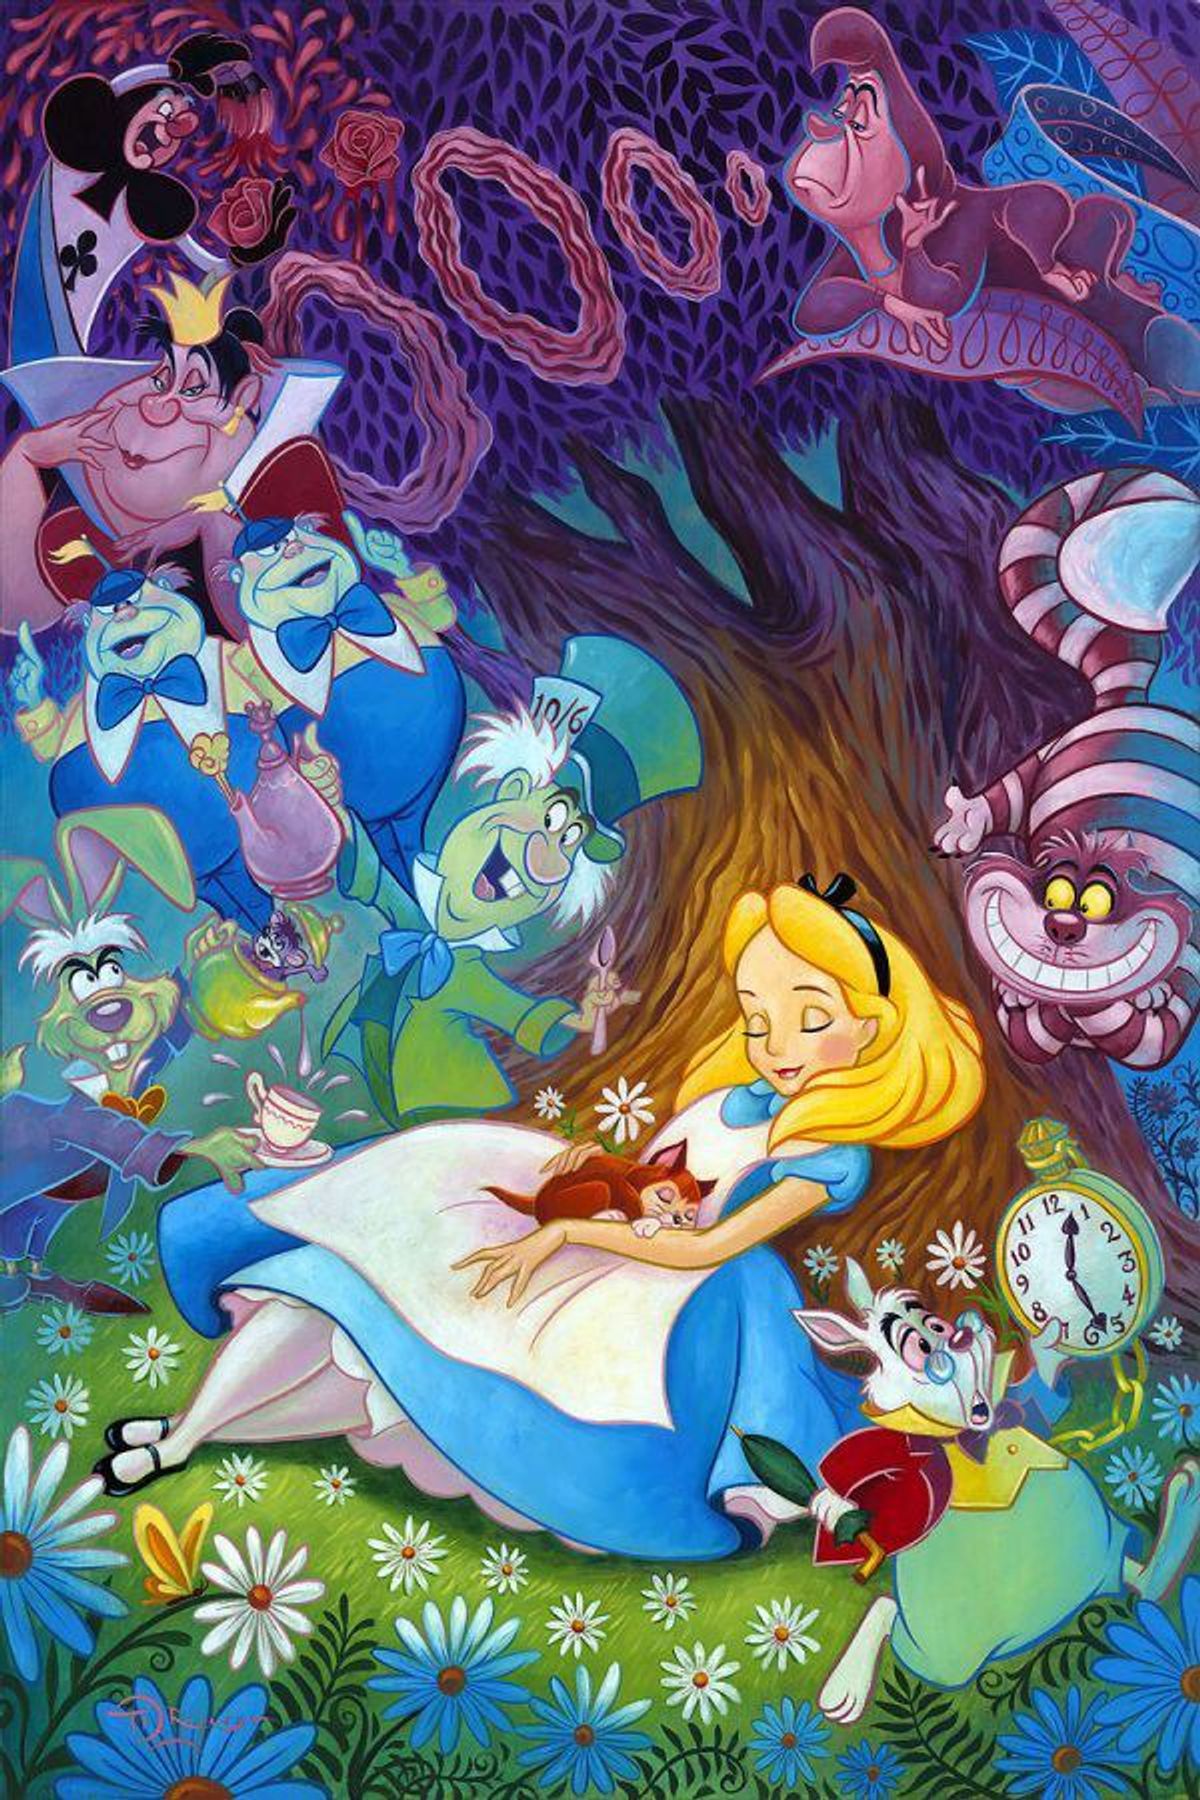 23 Quotes To Remember From 'Alice's Adventures in Wonderland'